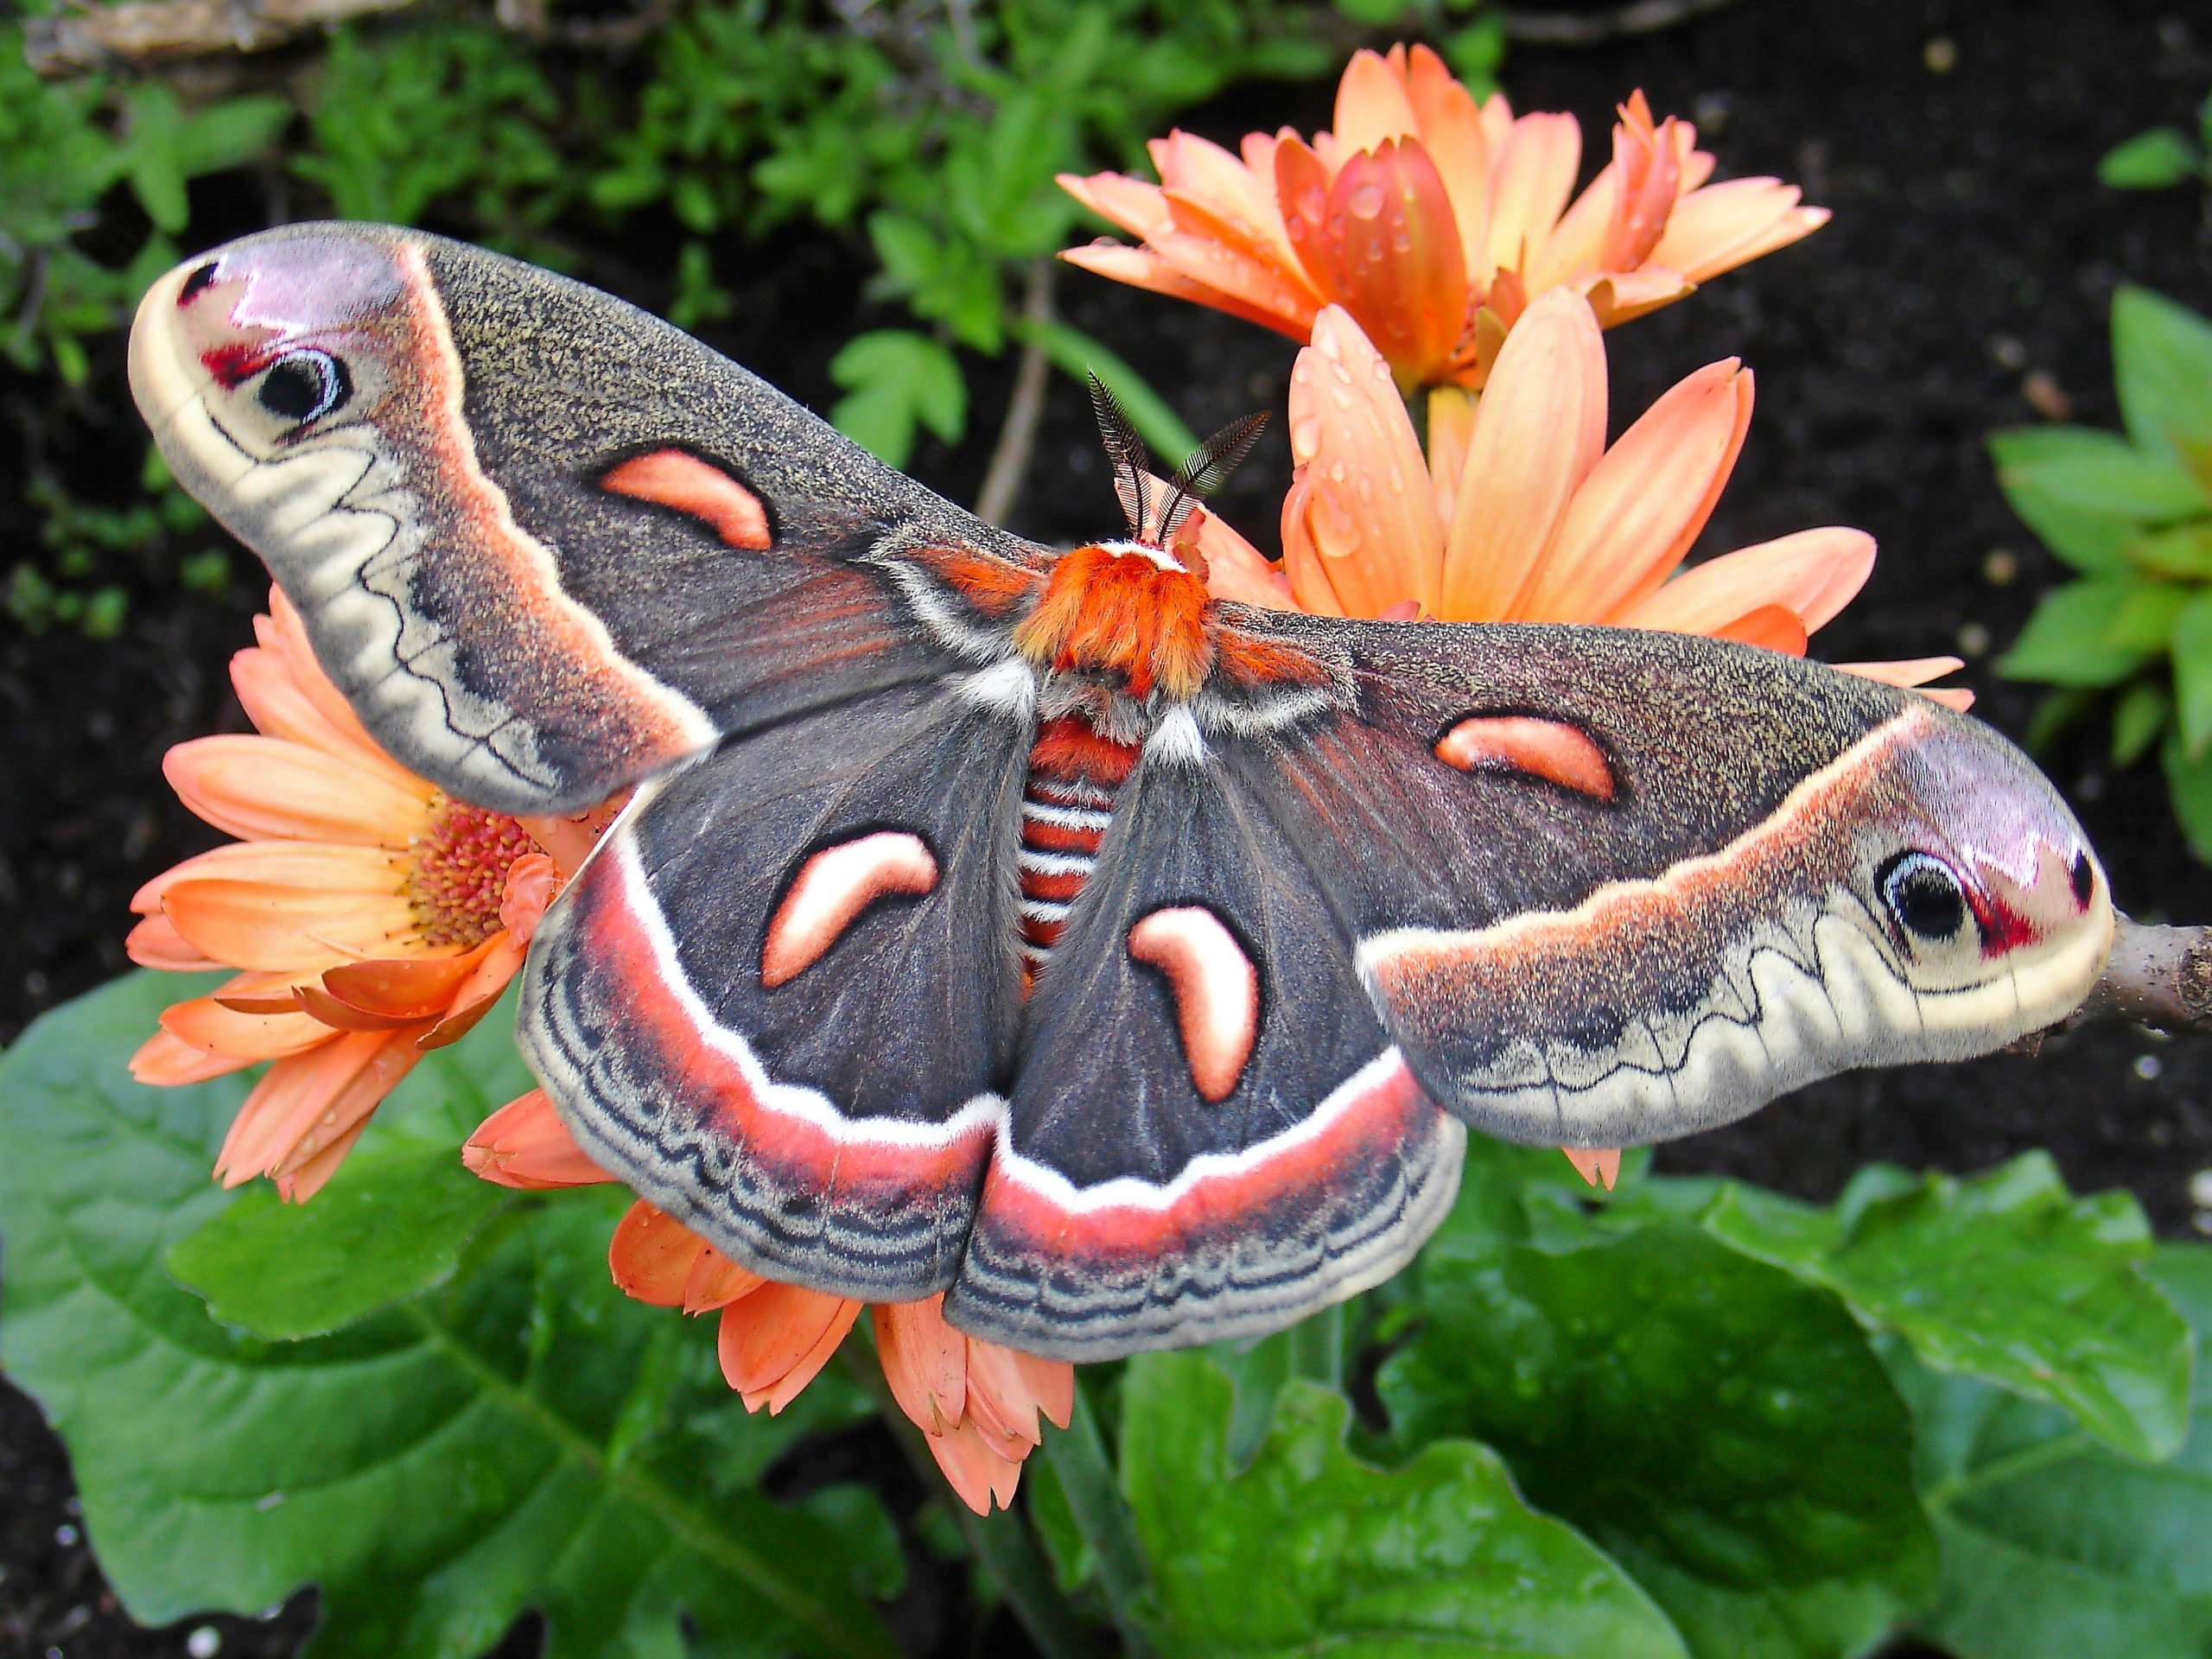 12 Pictures That Will Change the Way You Look At Moths